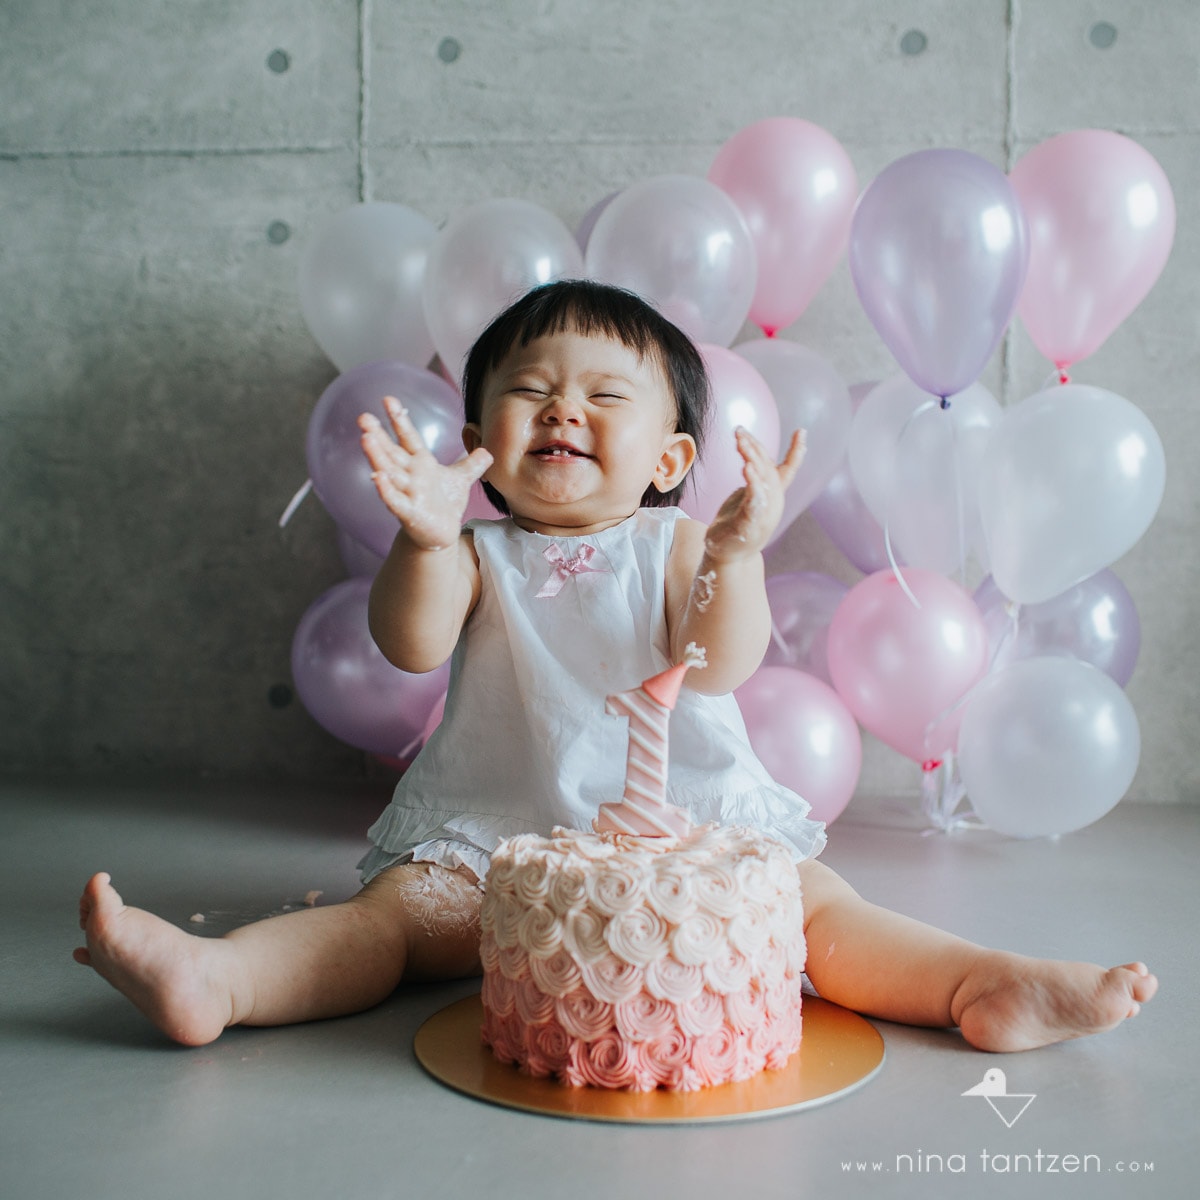 little girl happy about cake